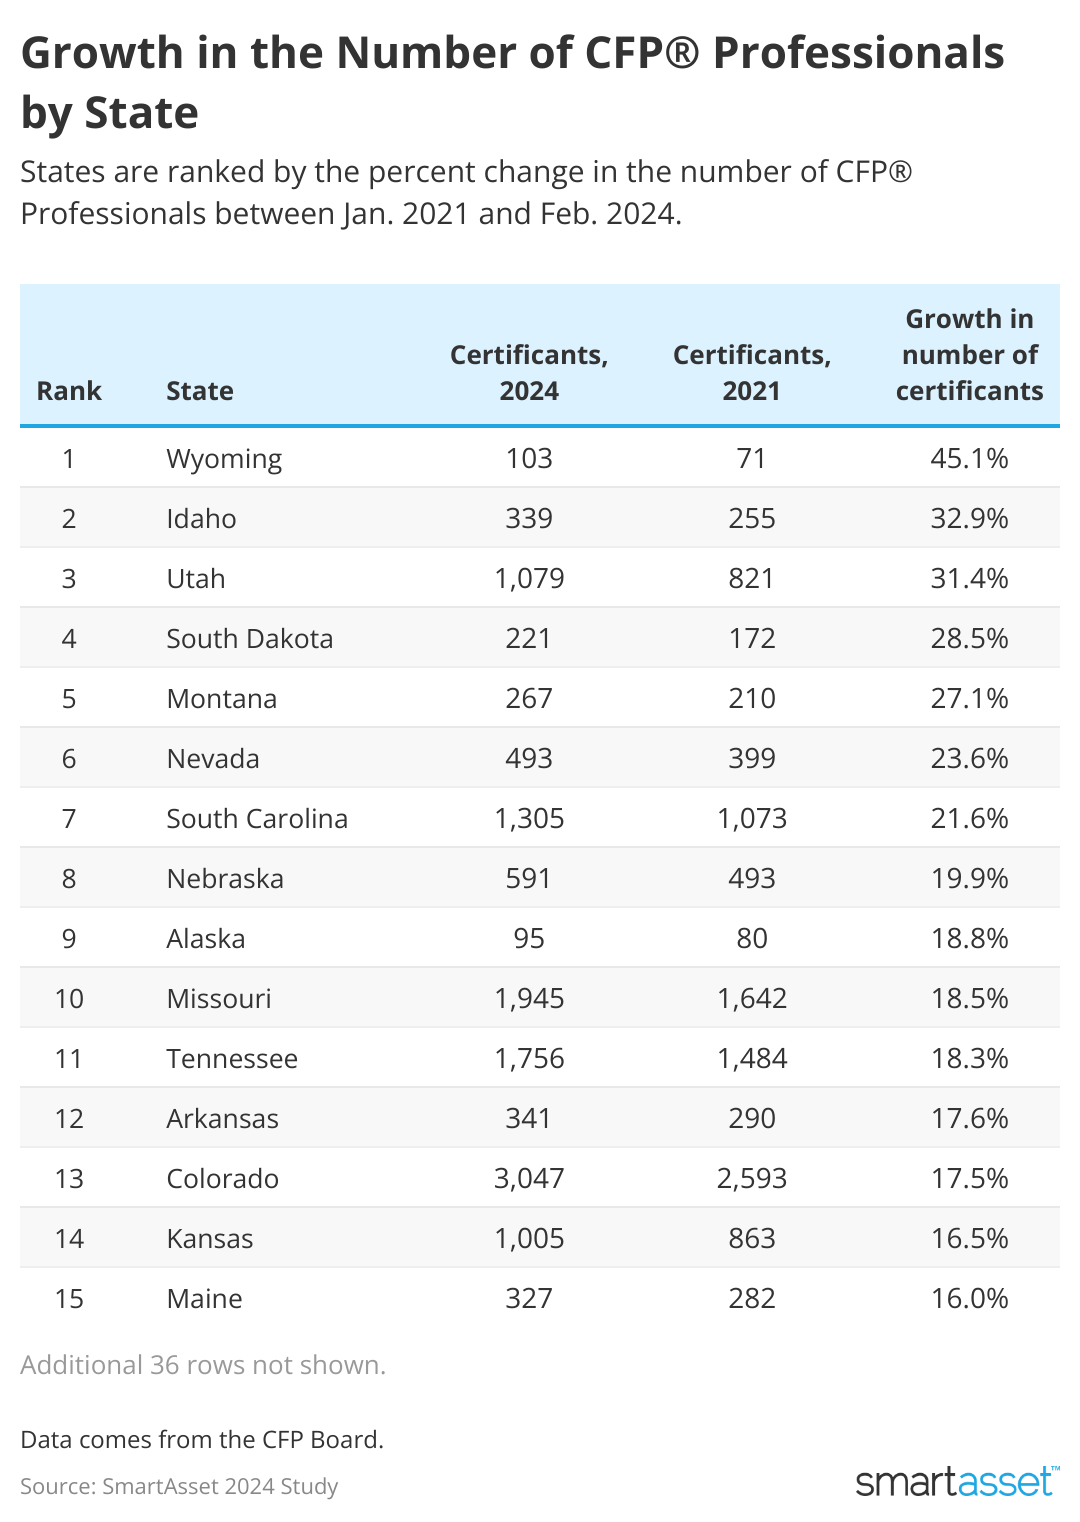 chart showing top 15 states with growth in the number of CFP professionals